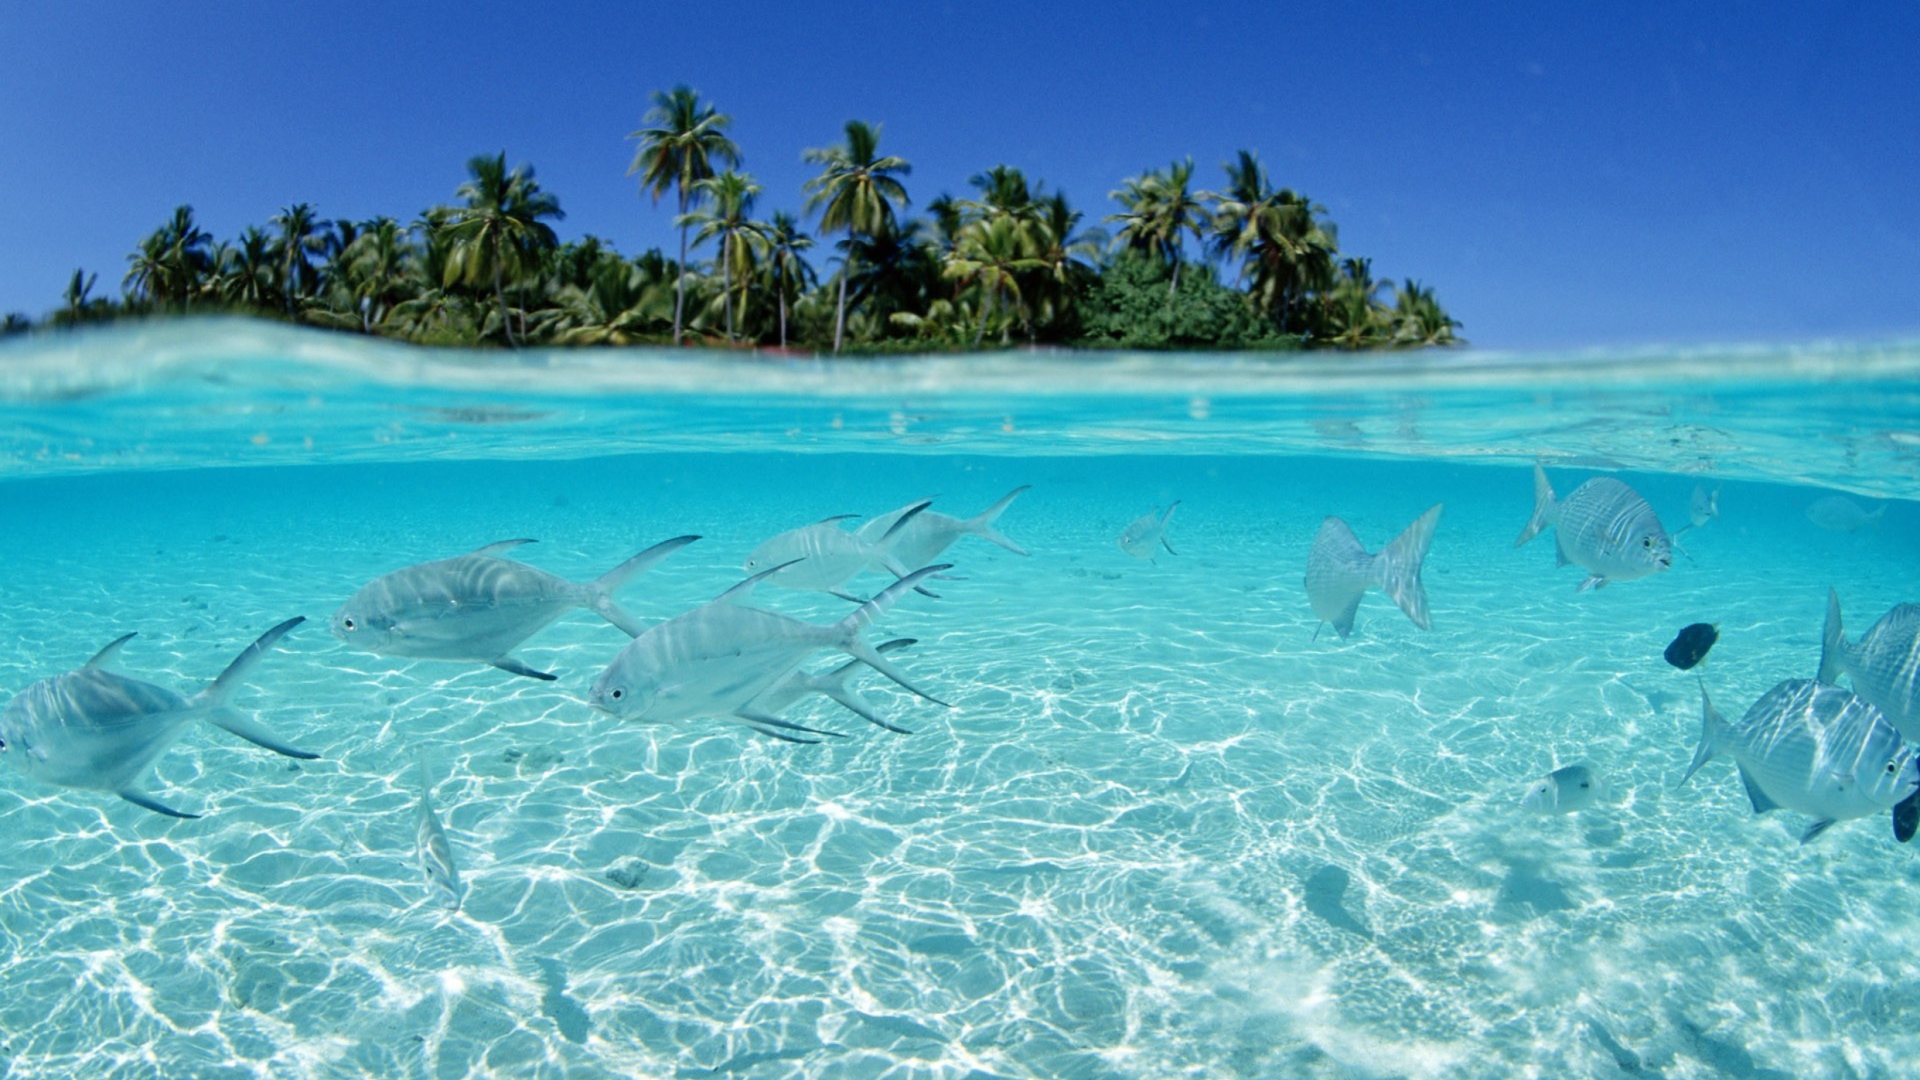 Tropical Island And Fish In Blue Sea wallpaper 1920x1080